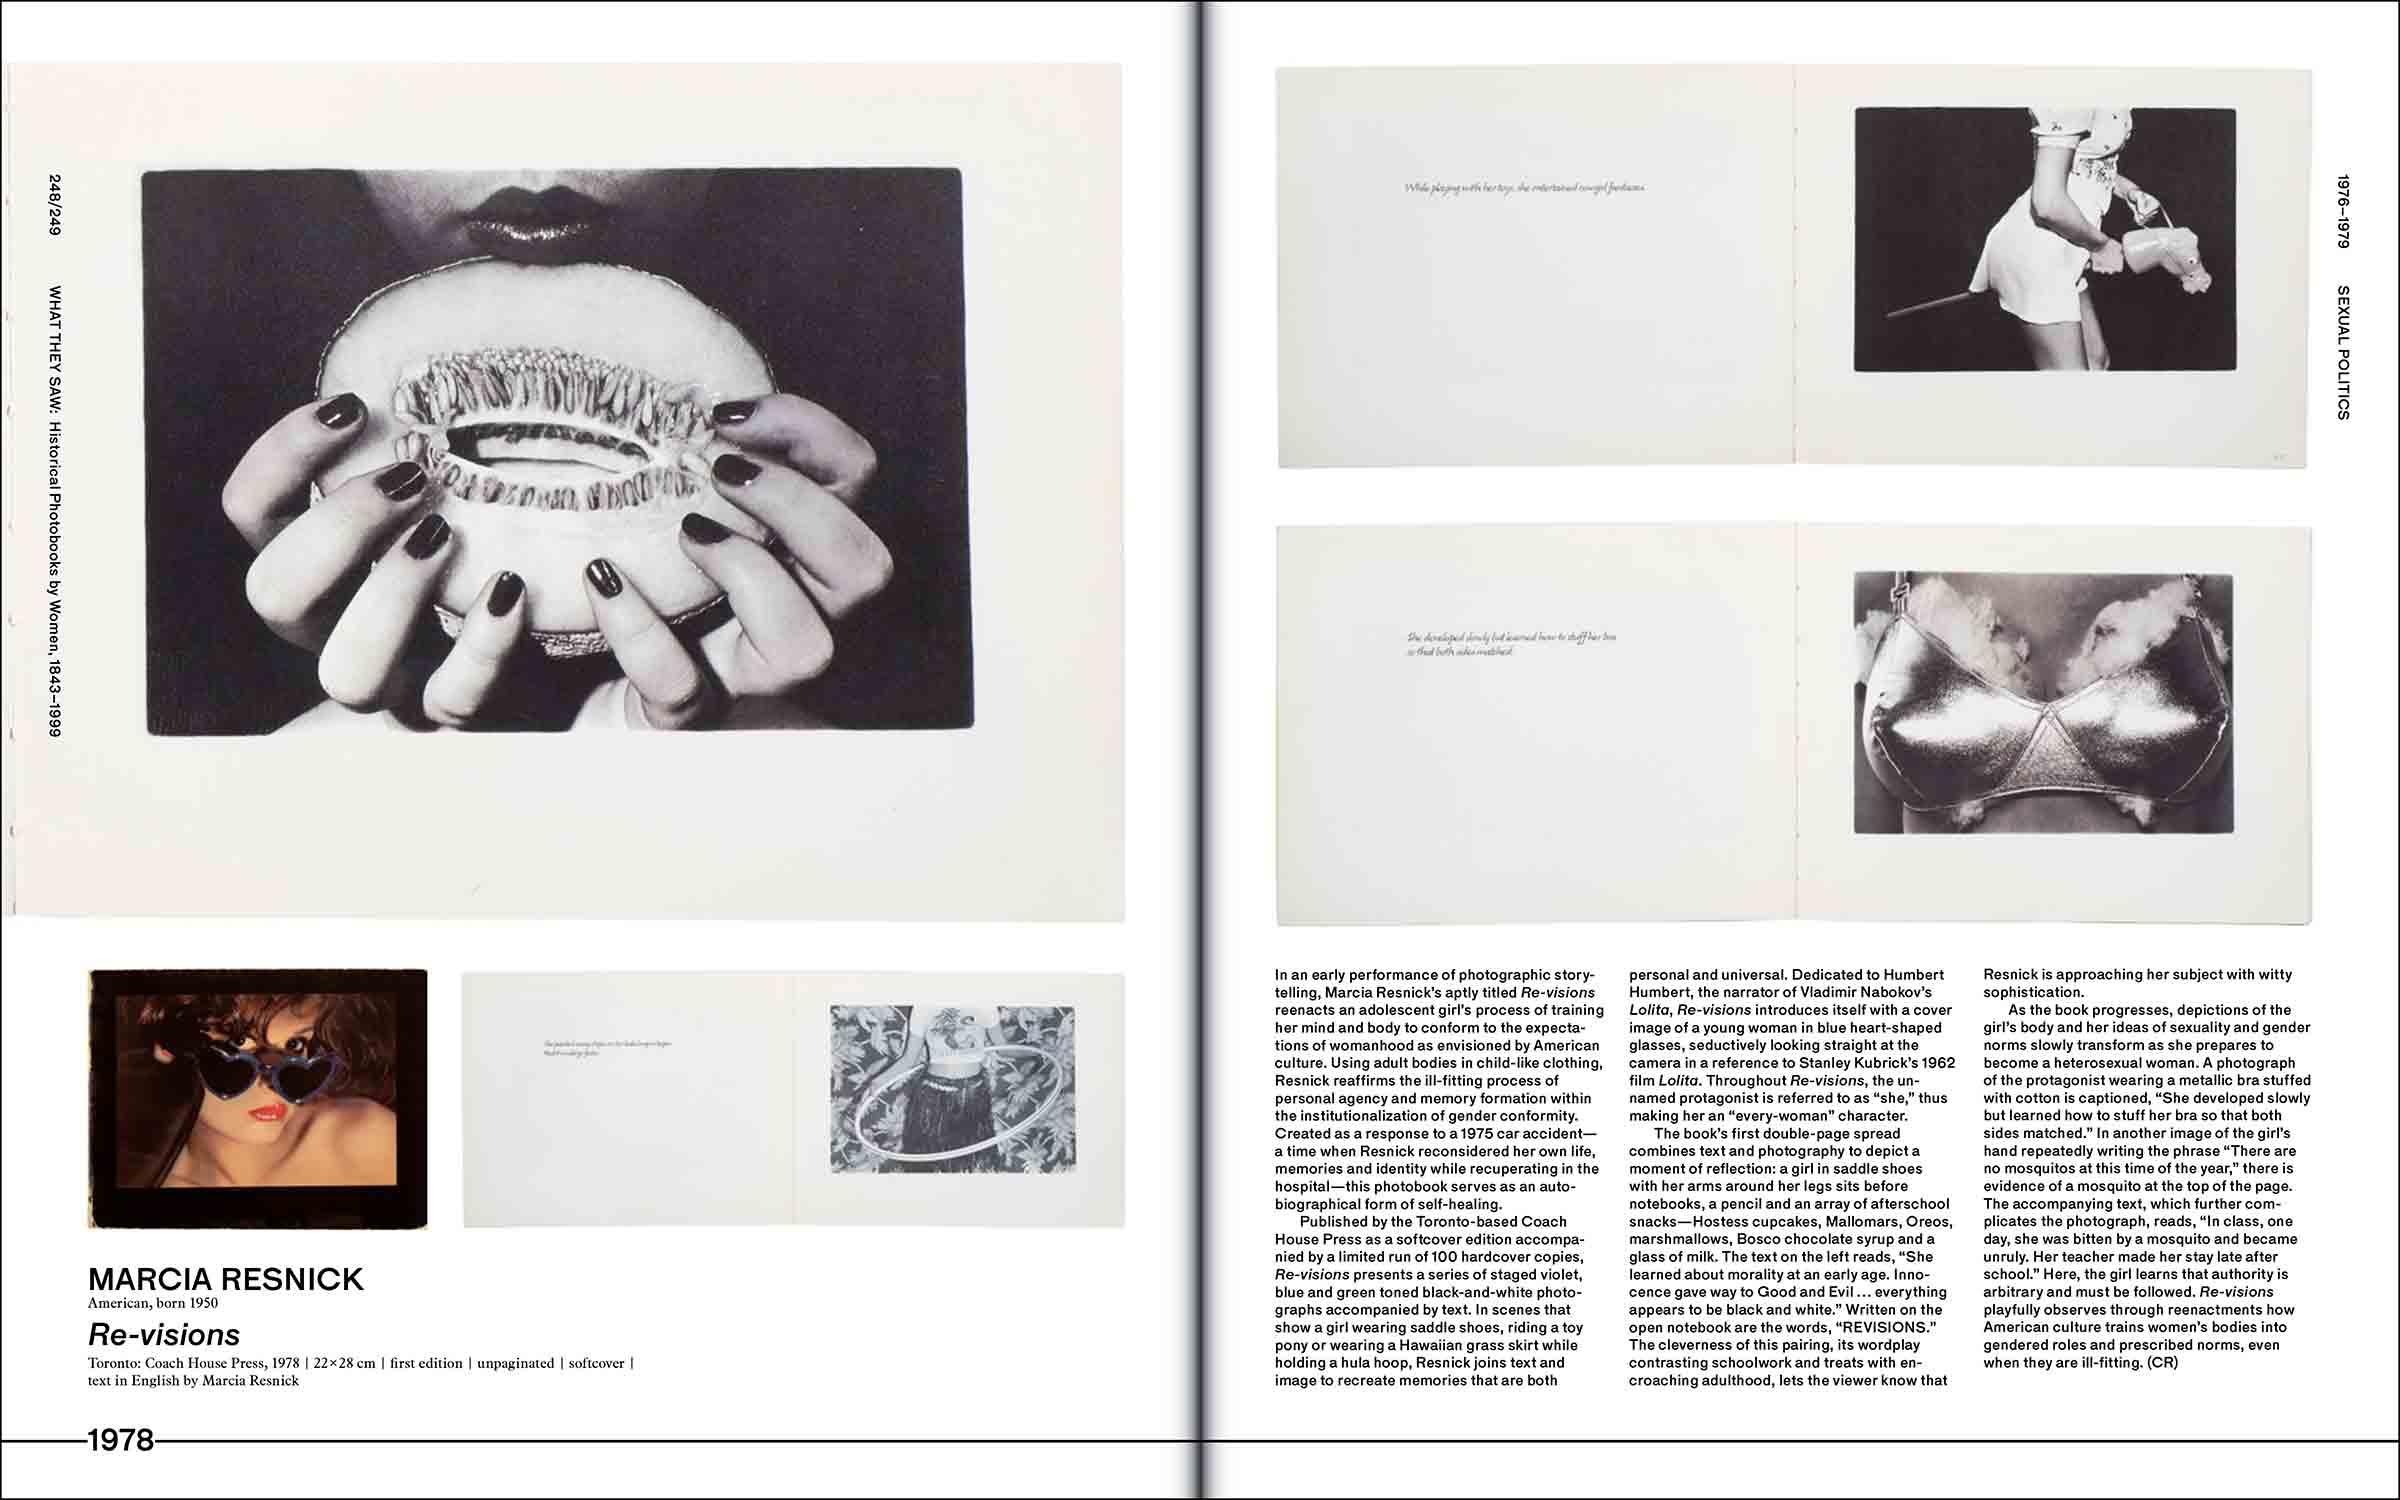 Marcia Resnick's "Re-visions," featured in What They Saw: Historical Photobooks by Women, 1843–1999 (Courtesy Marcia Resnick/10x10 Photobooks)